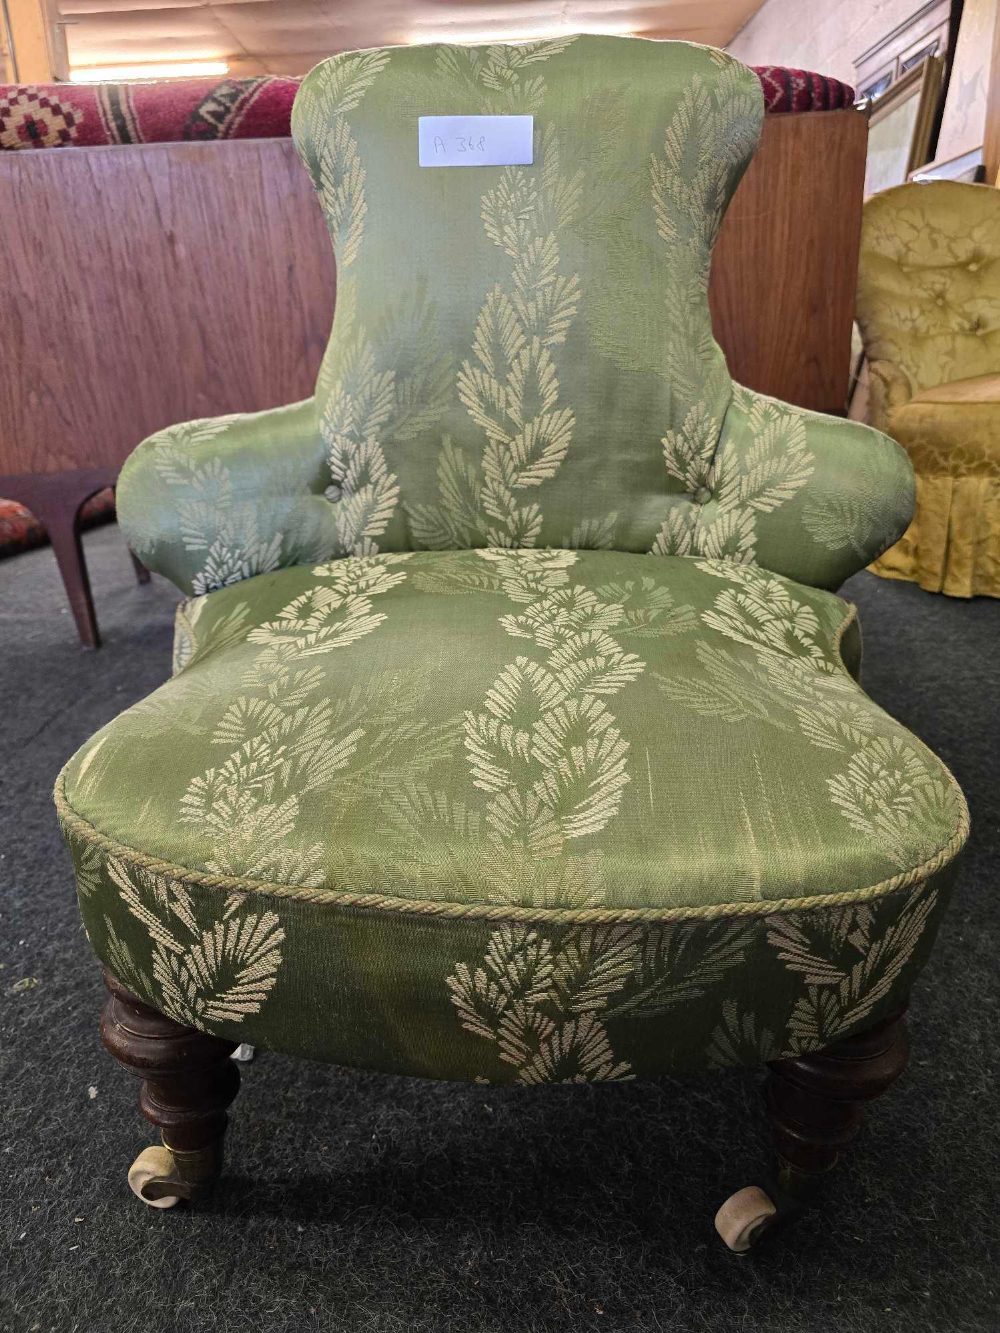 GREEN PATTERNED ANTIQUE CHAIR